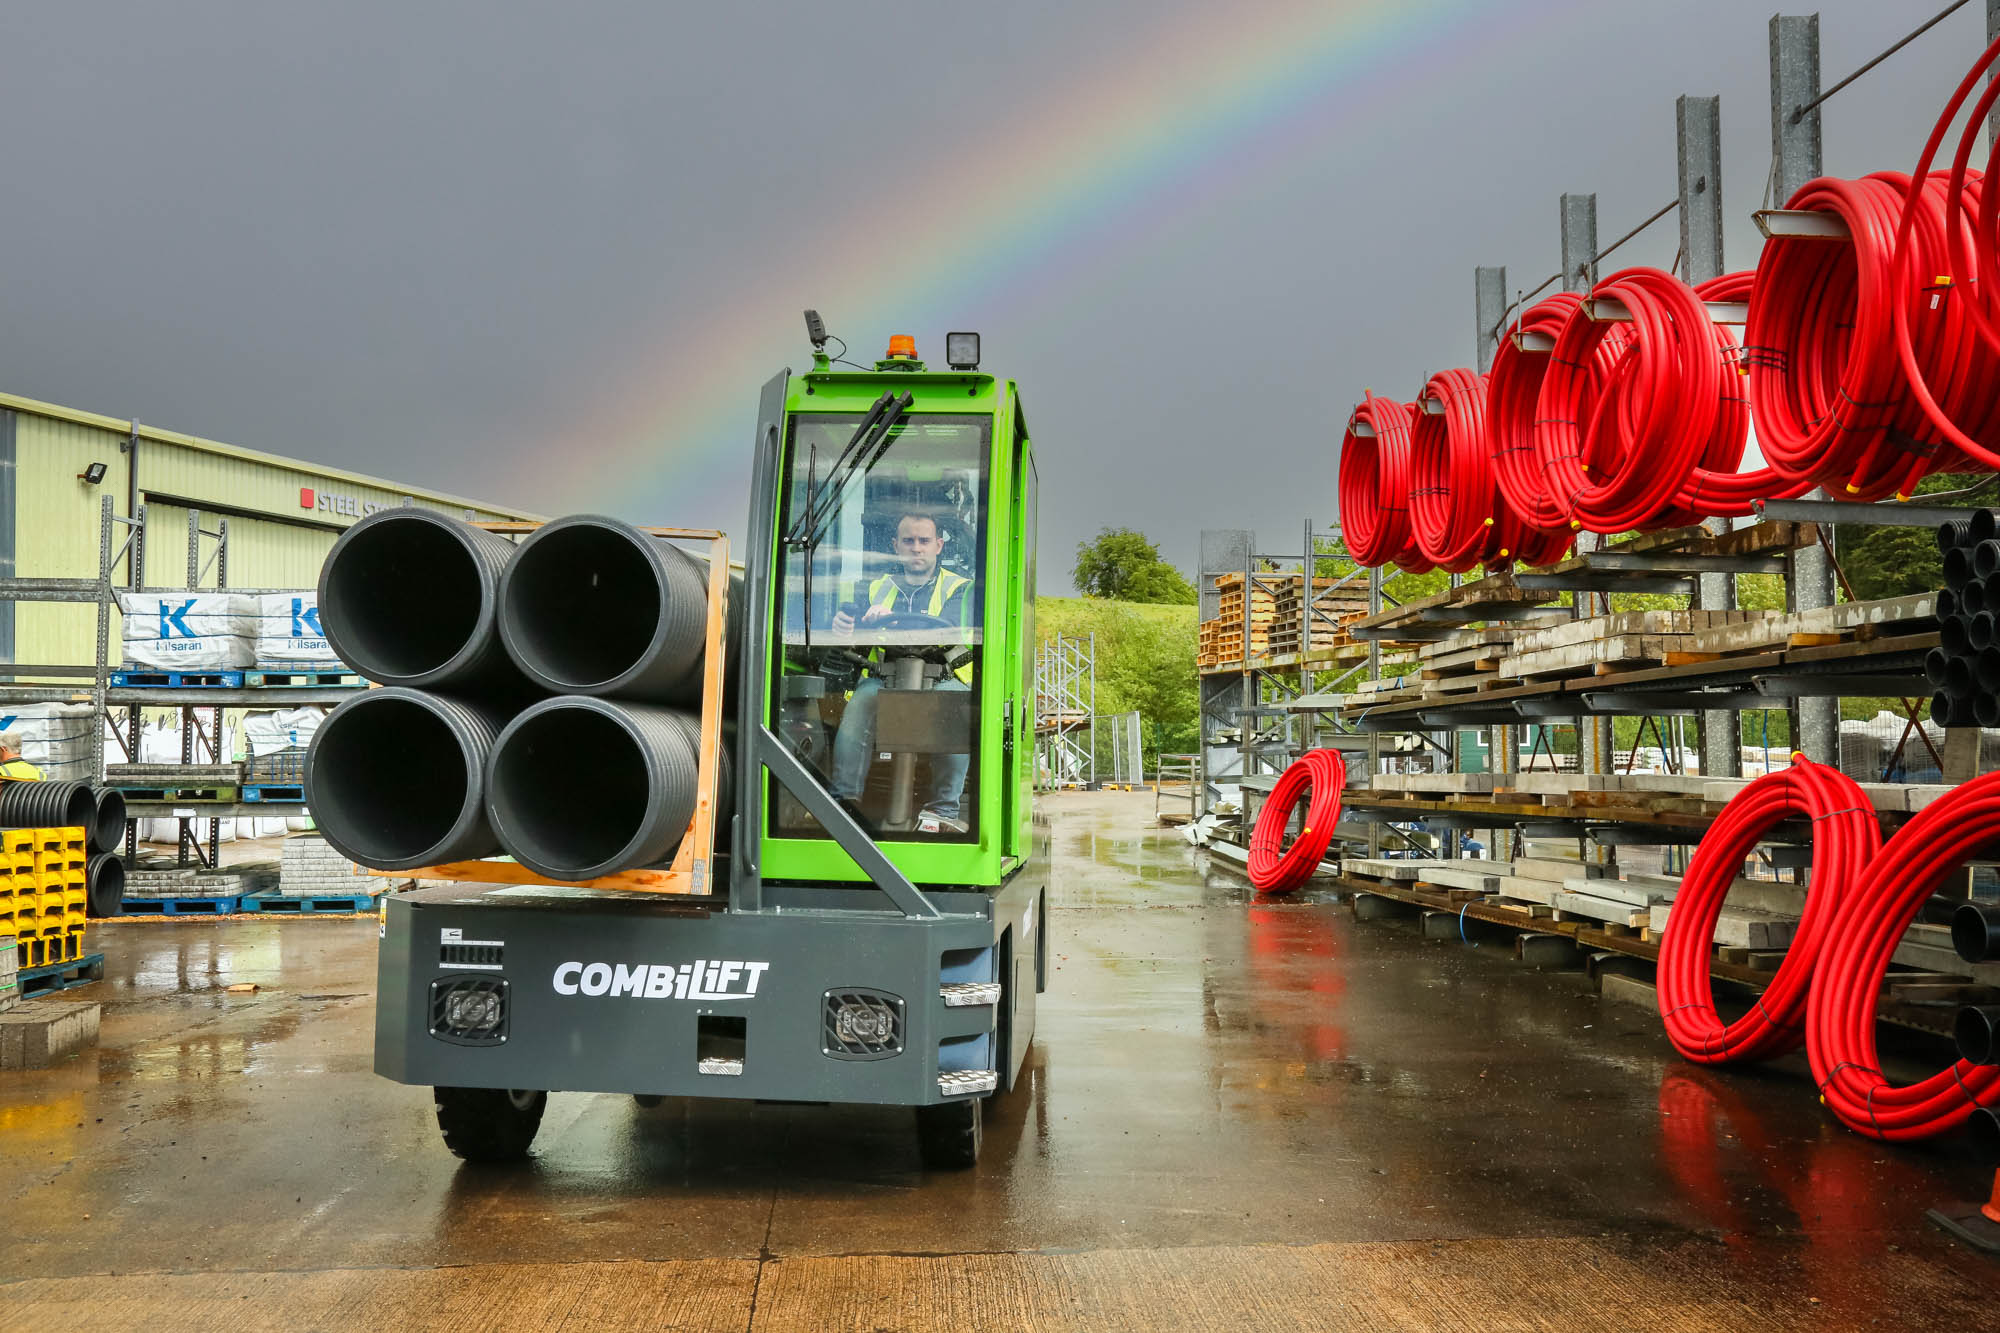 Introducing the Combi-FSE – the new electric sideloader from Combilift